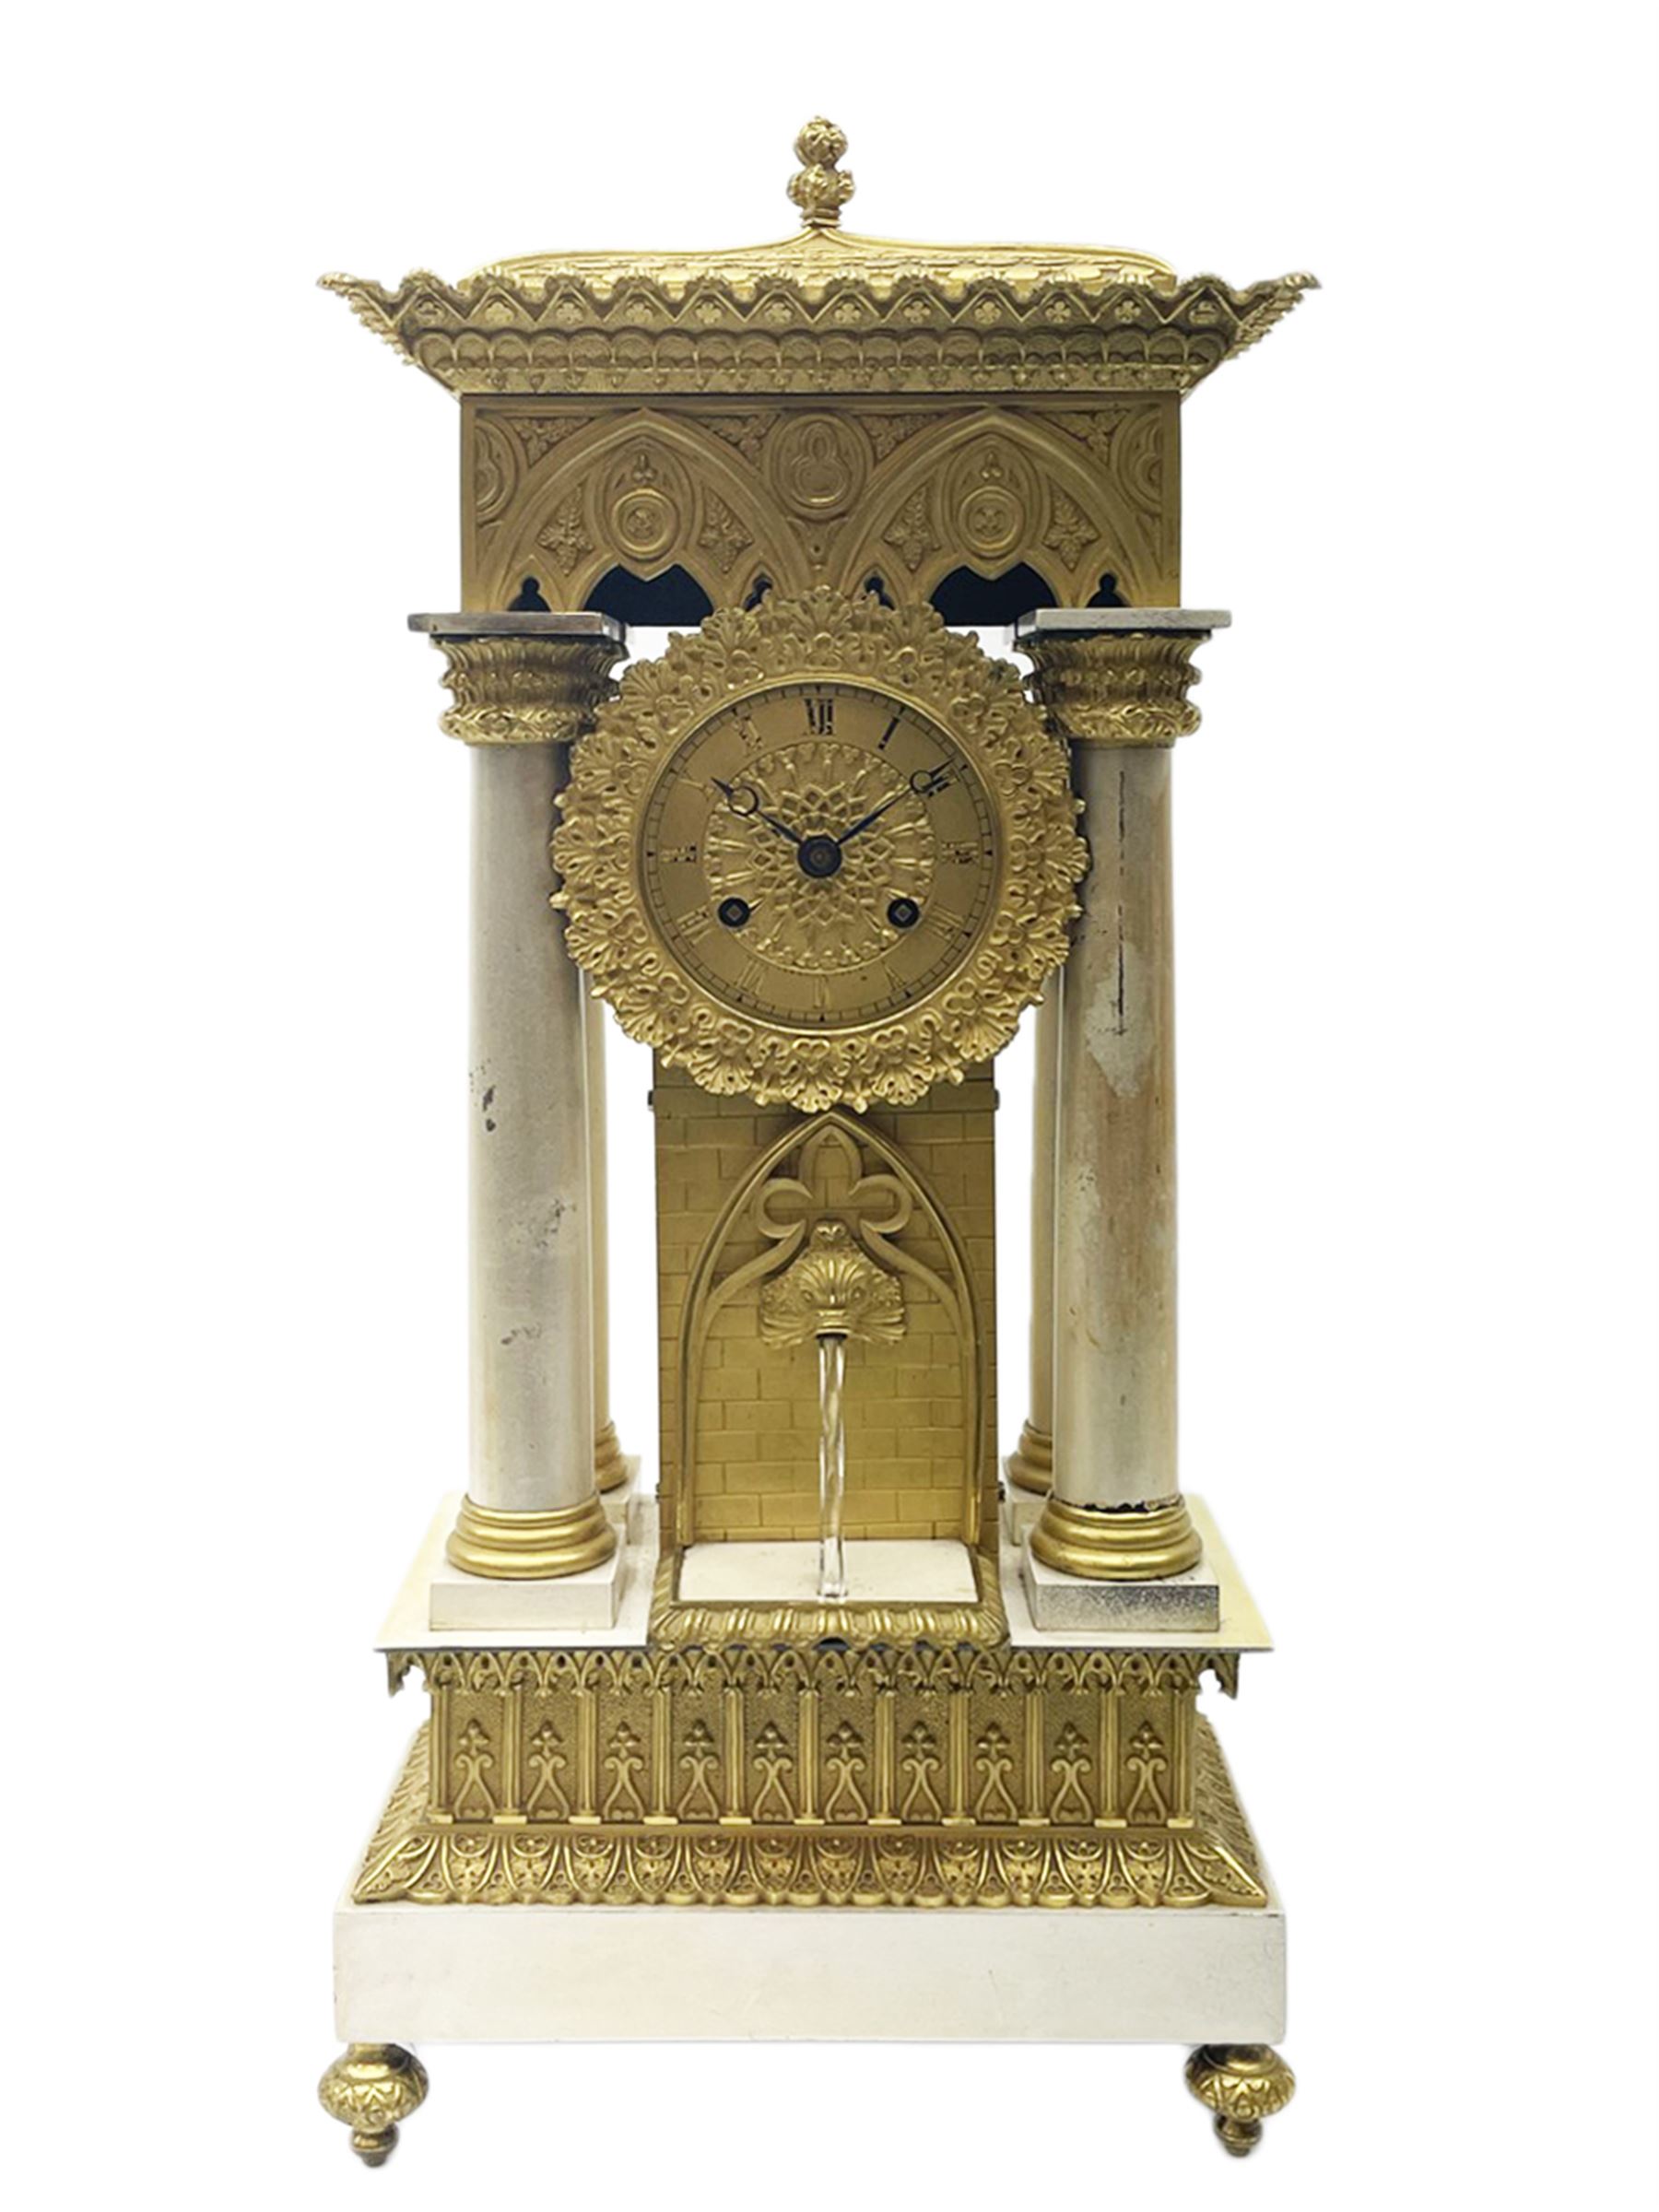 Mid 19th century French silvered and ormolu portico automaton clock in Gothic style case by Leroy A